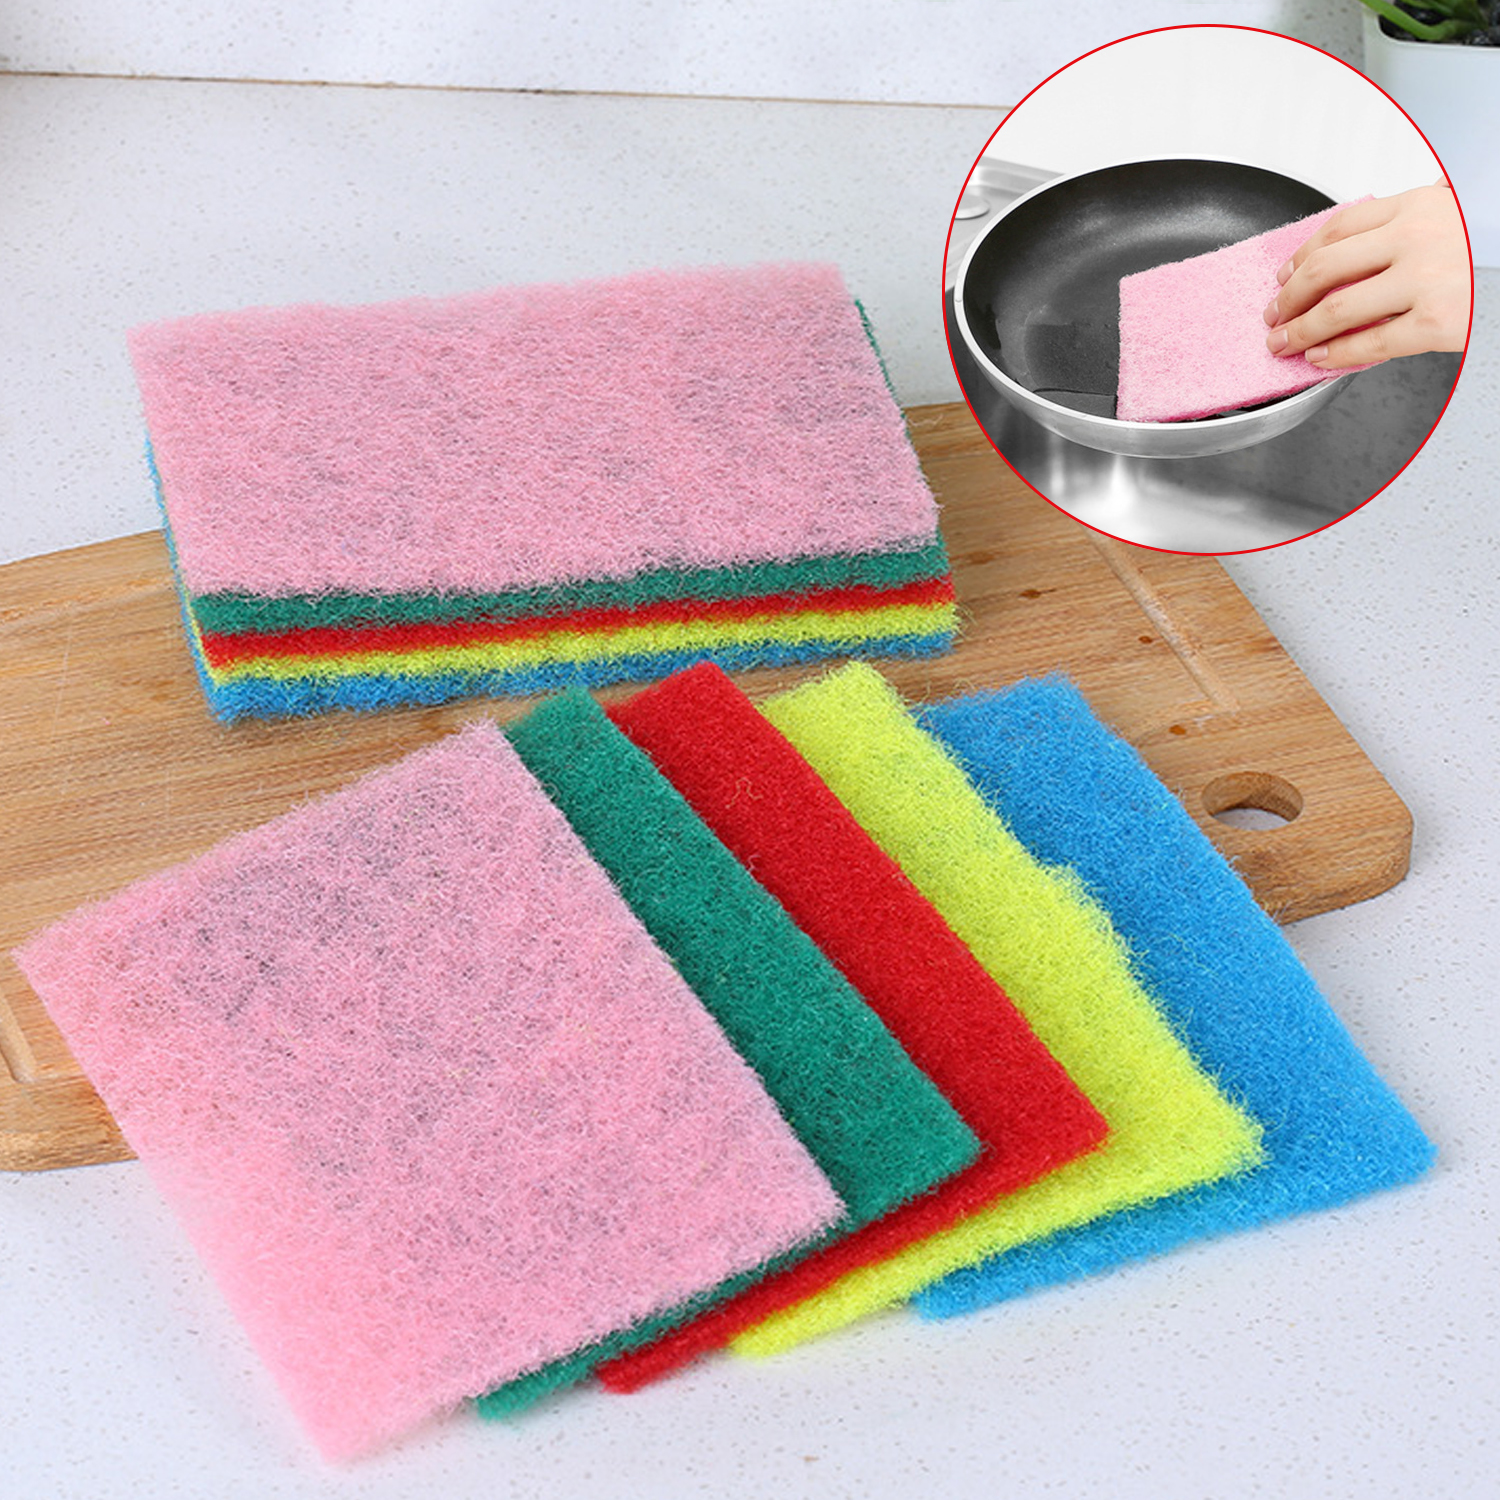 Cellulose Sponge Cloths Eco-friendly Reusable Cleaning Cloths Hand Towel Dishcloth for Kitchen Absorbent Dish Cloth